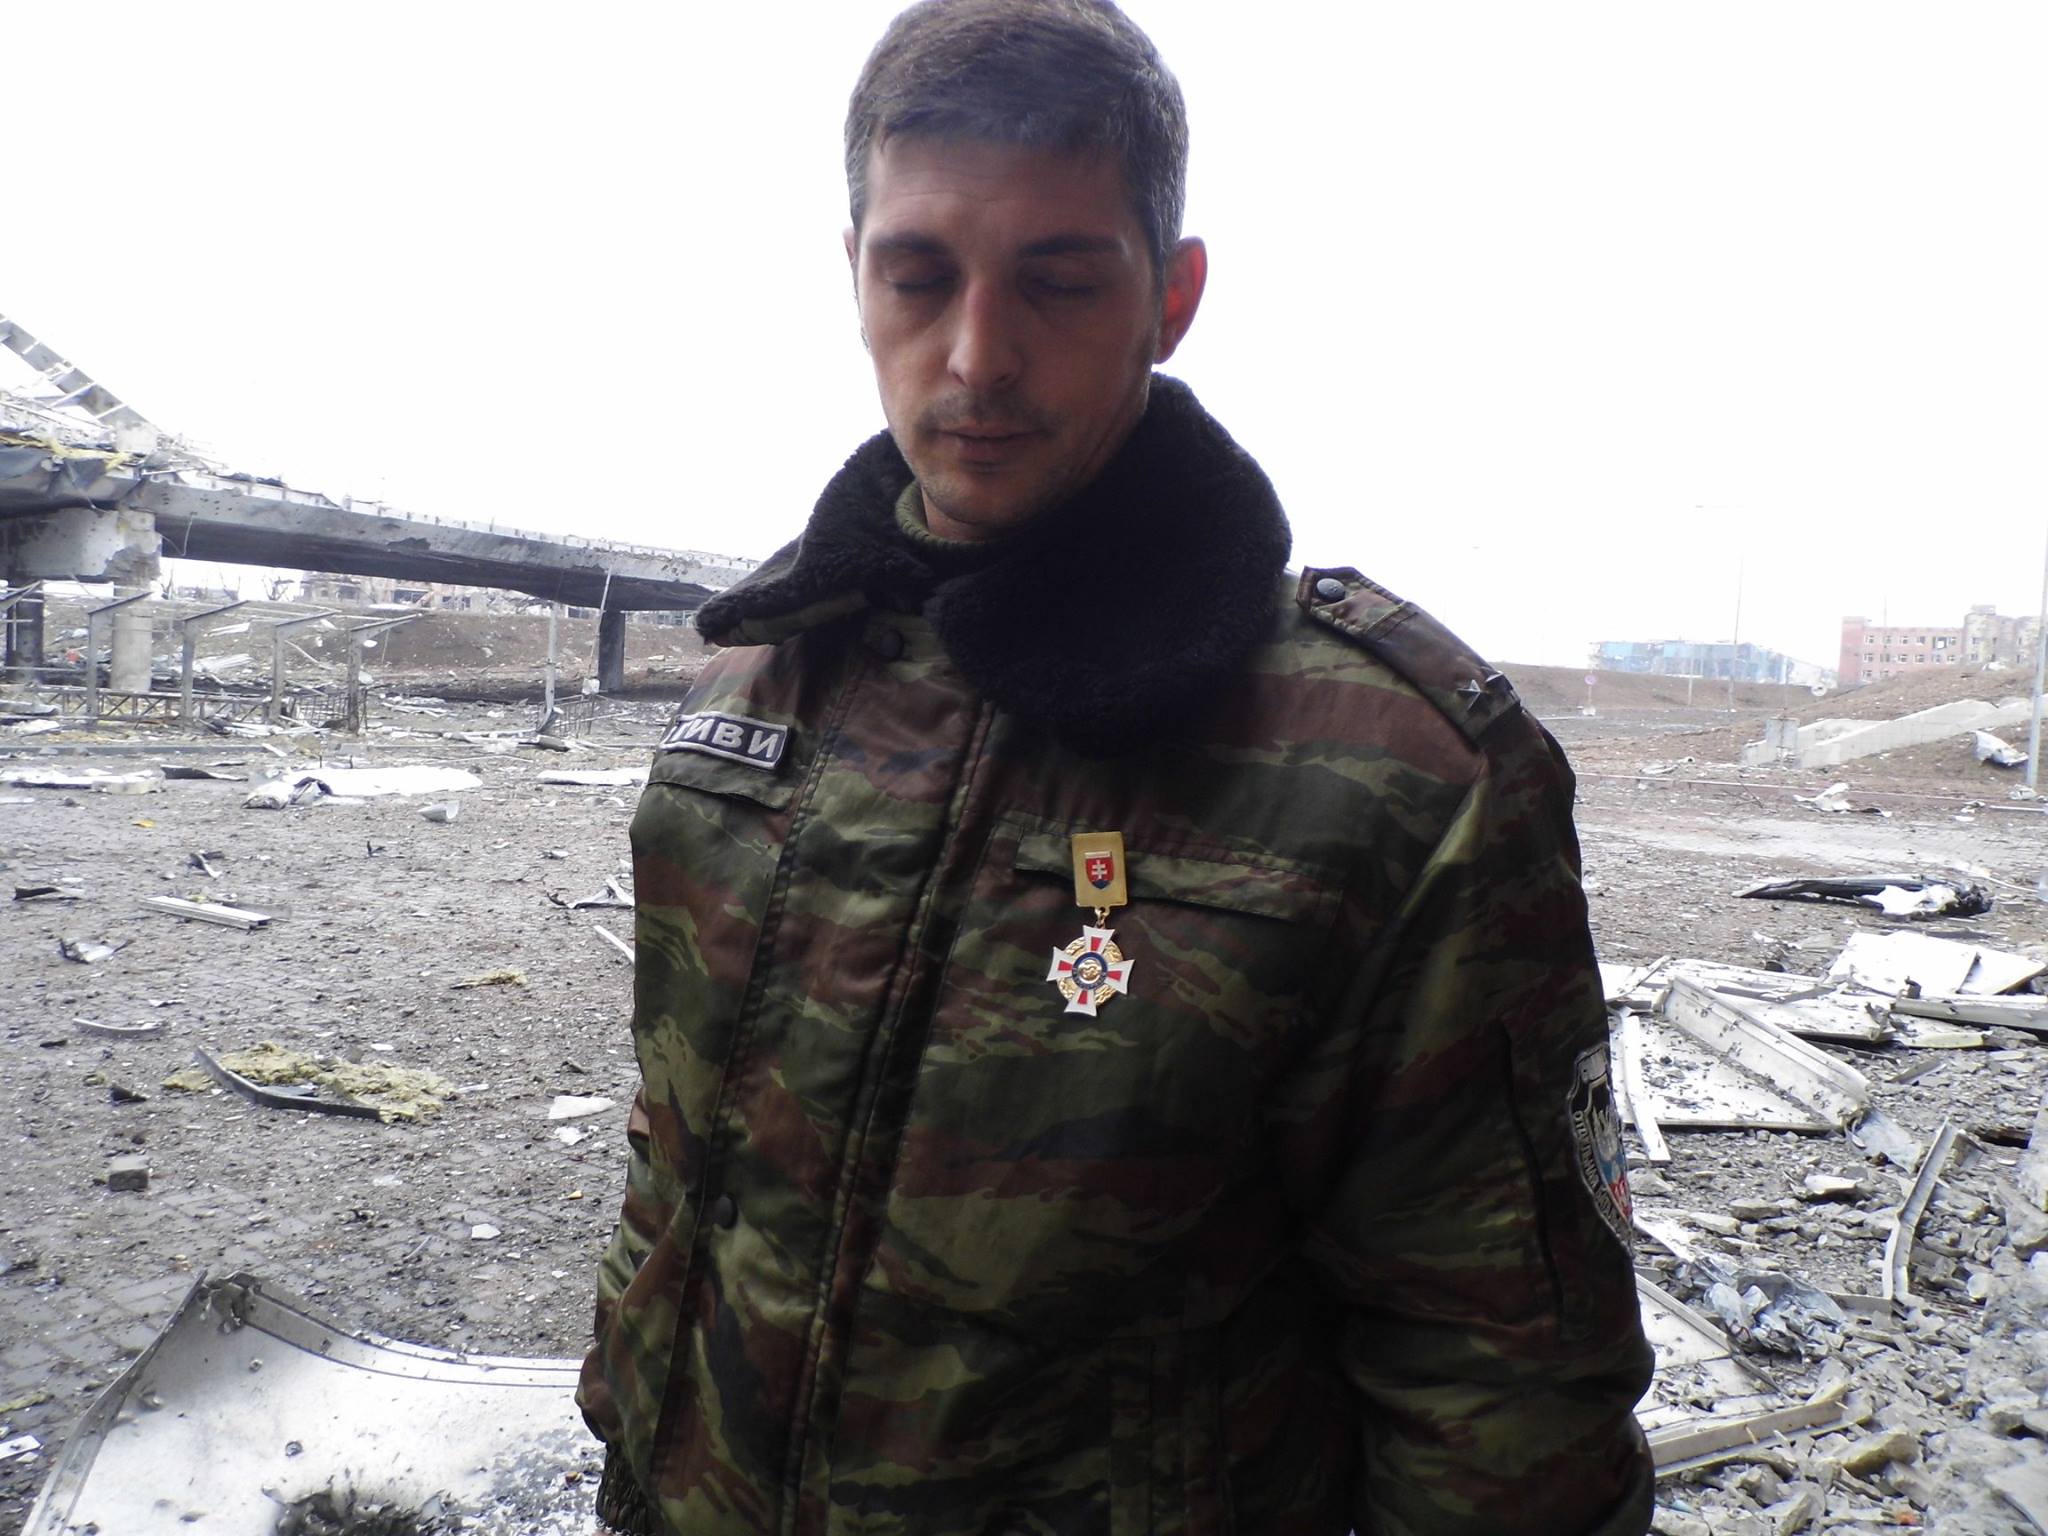 Givi was awarded for the defence of the peaceful population of Donetsk by the Honorable Ambassy of the Slovak Republic